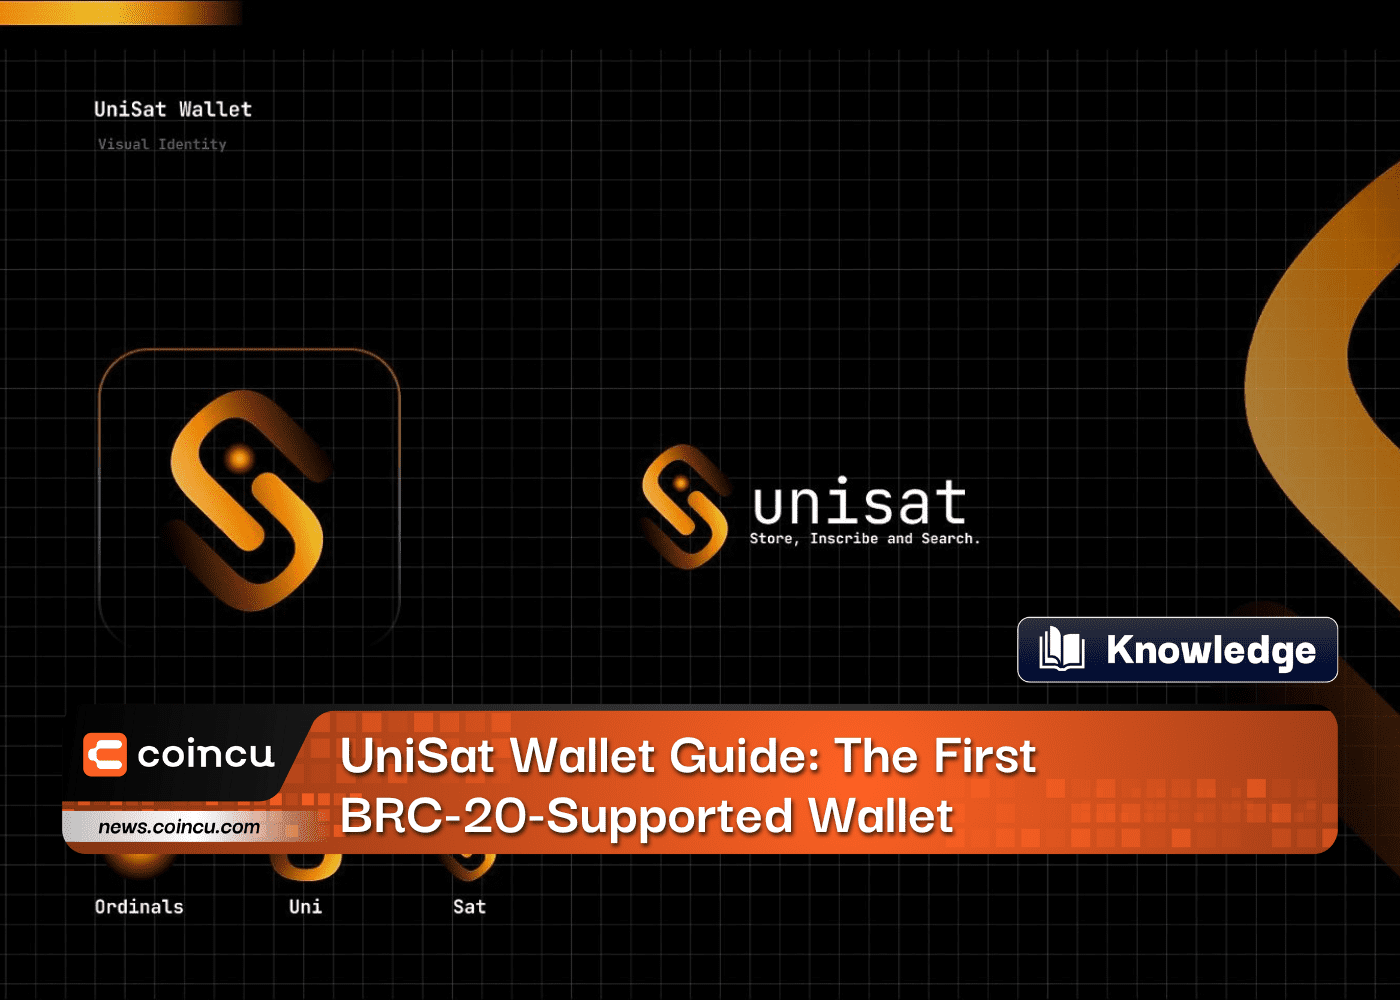 UniSat Wallet Guide: The First BRC-20-Supported Wallet